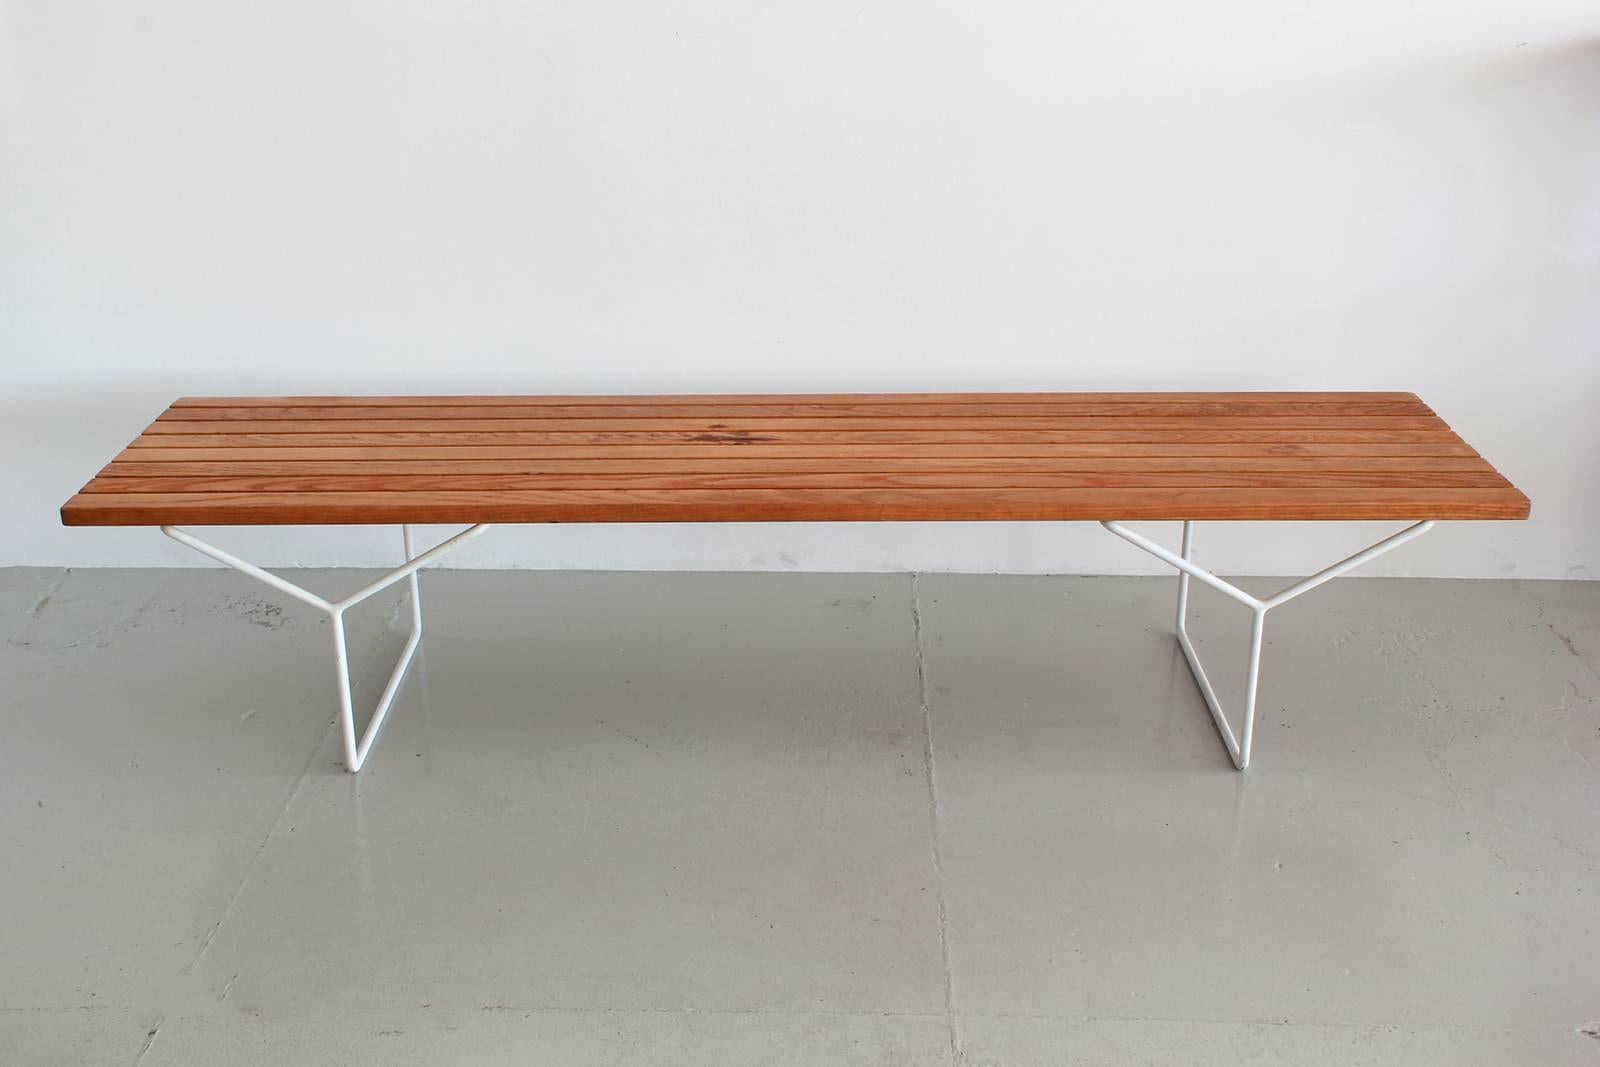 Slatted wood bench by Harry Bertoia for Knoll International.
Rare white metal legs. 
Great patina to ashwood.